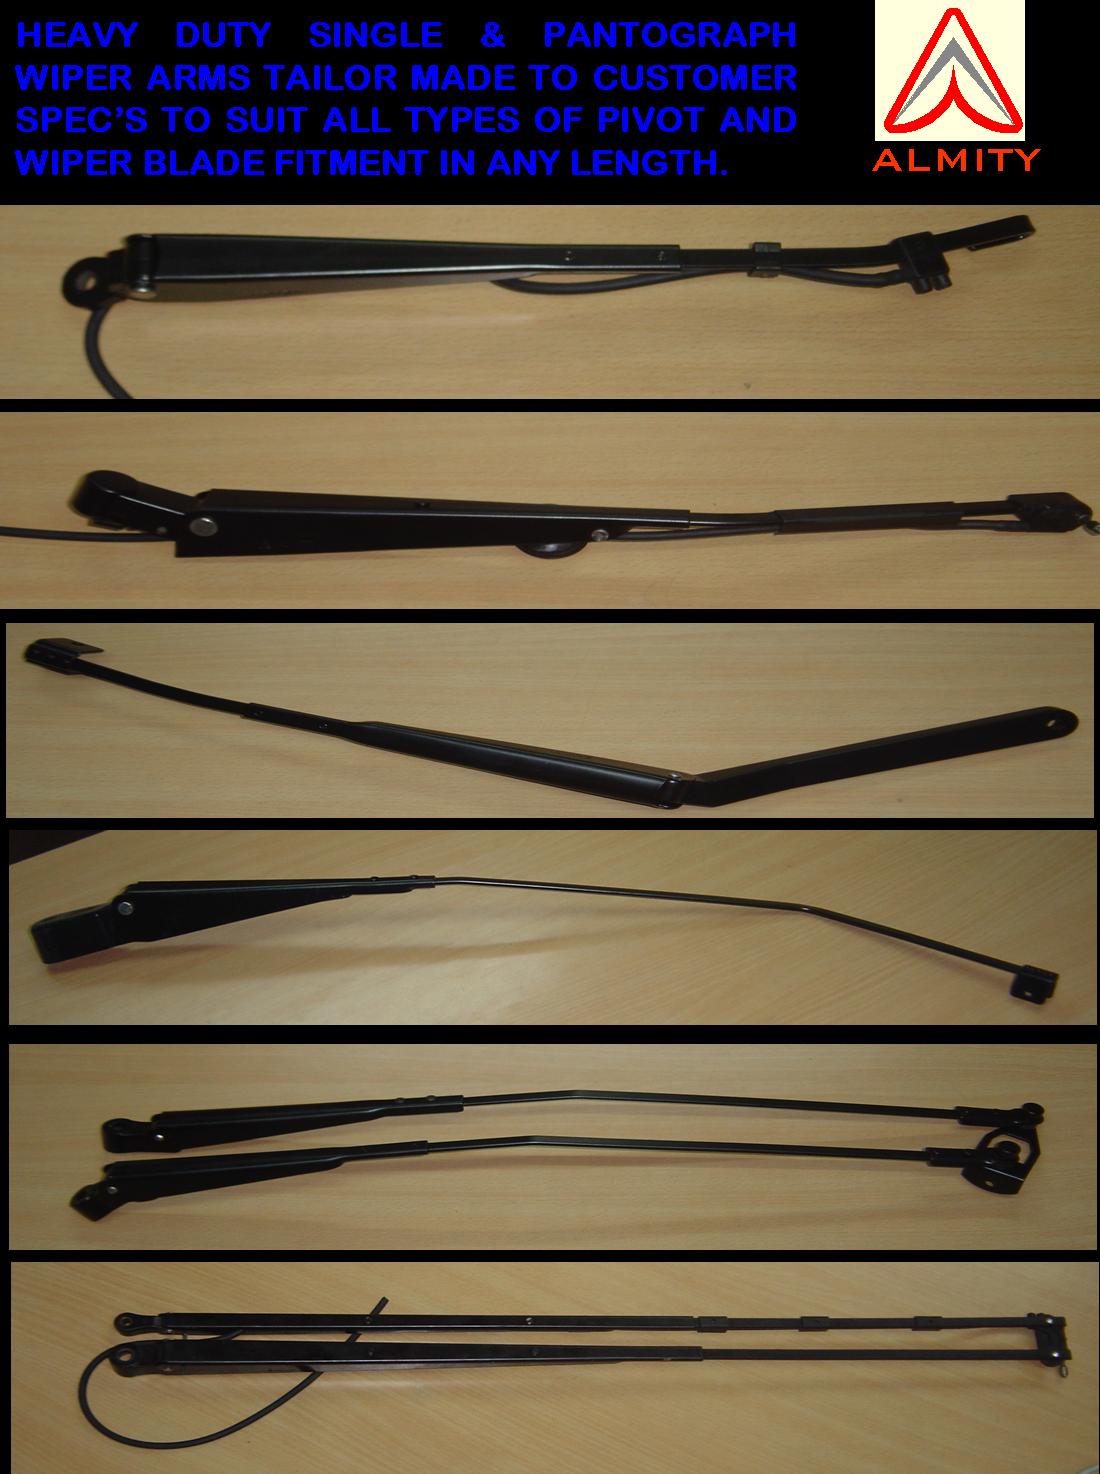 Wiper Systems for Automobile, Wiper linkages, Wiper Arms, Wiper Blades